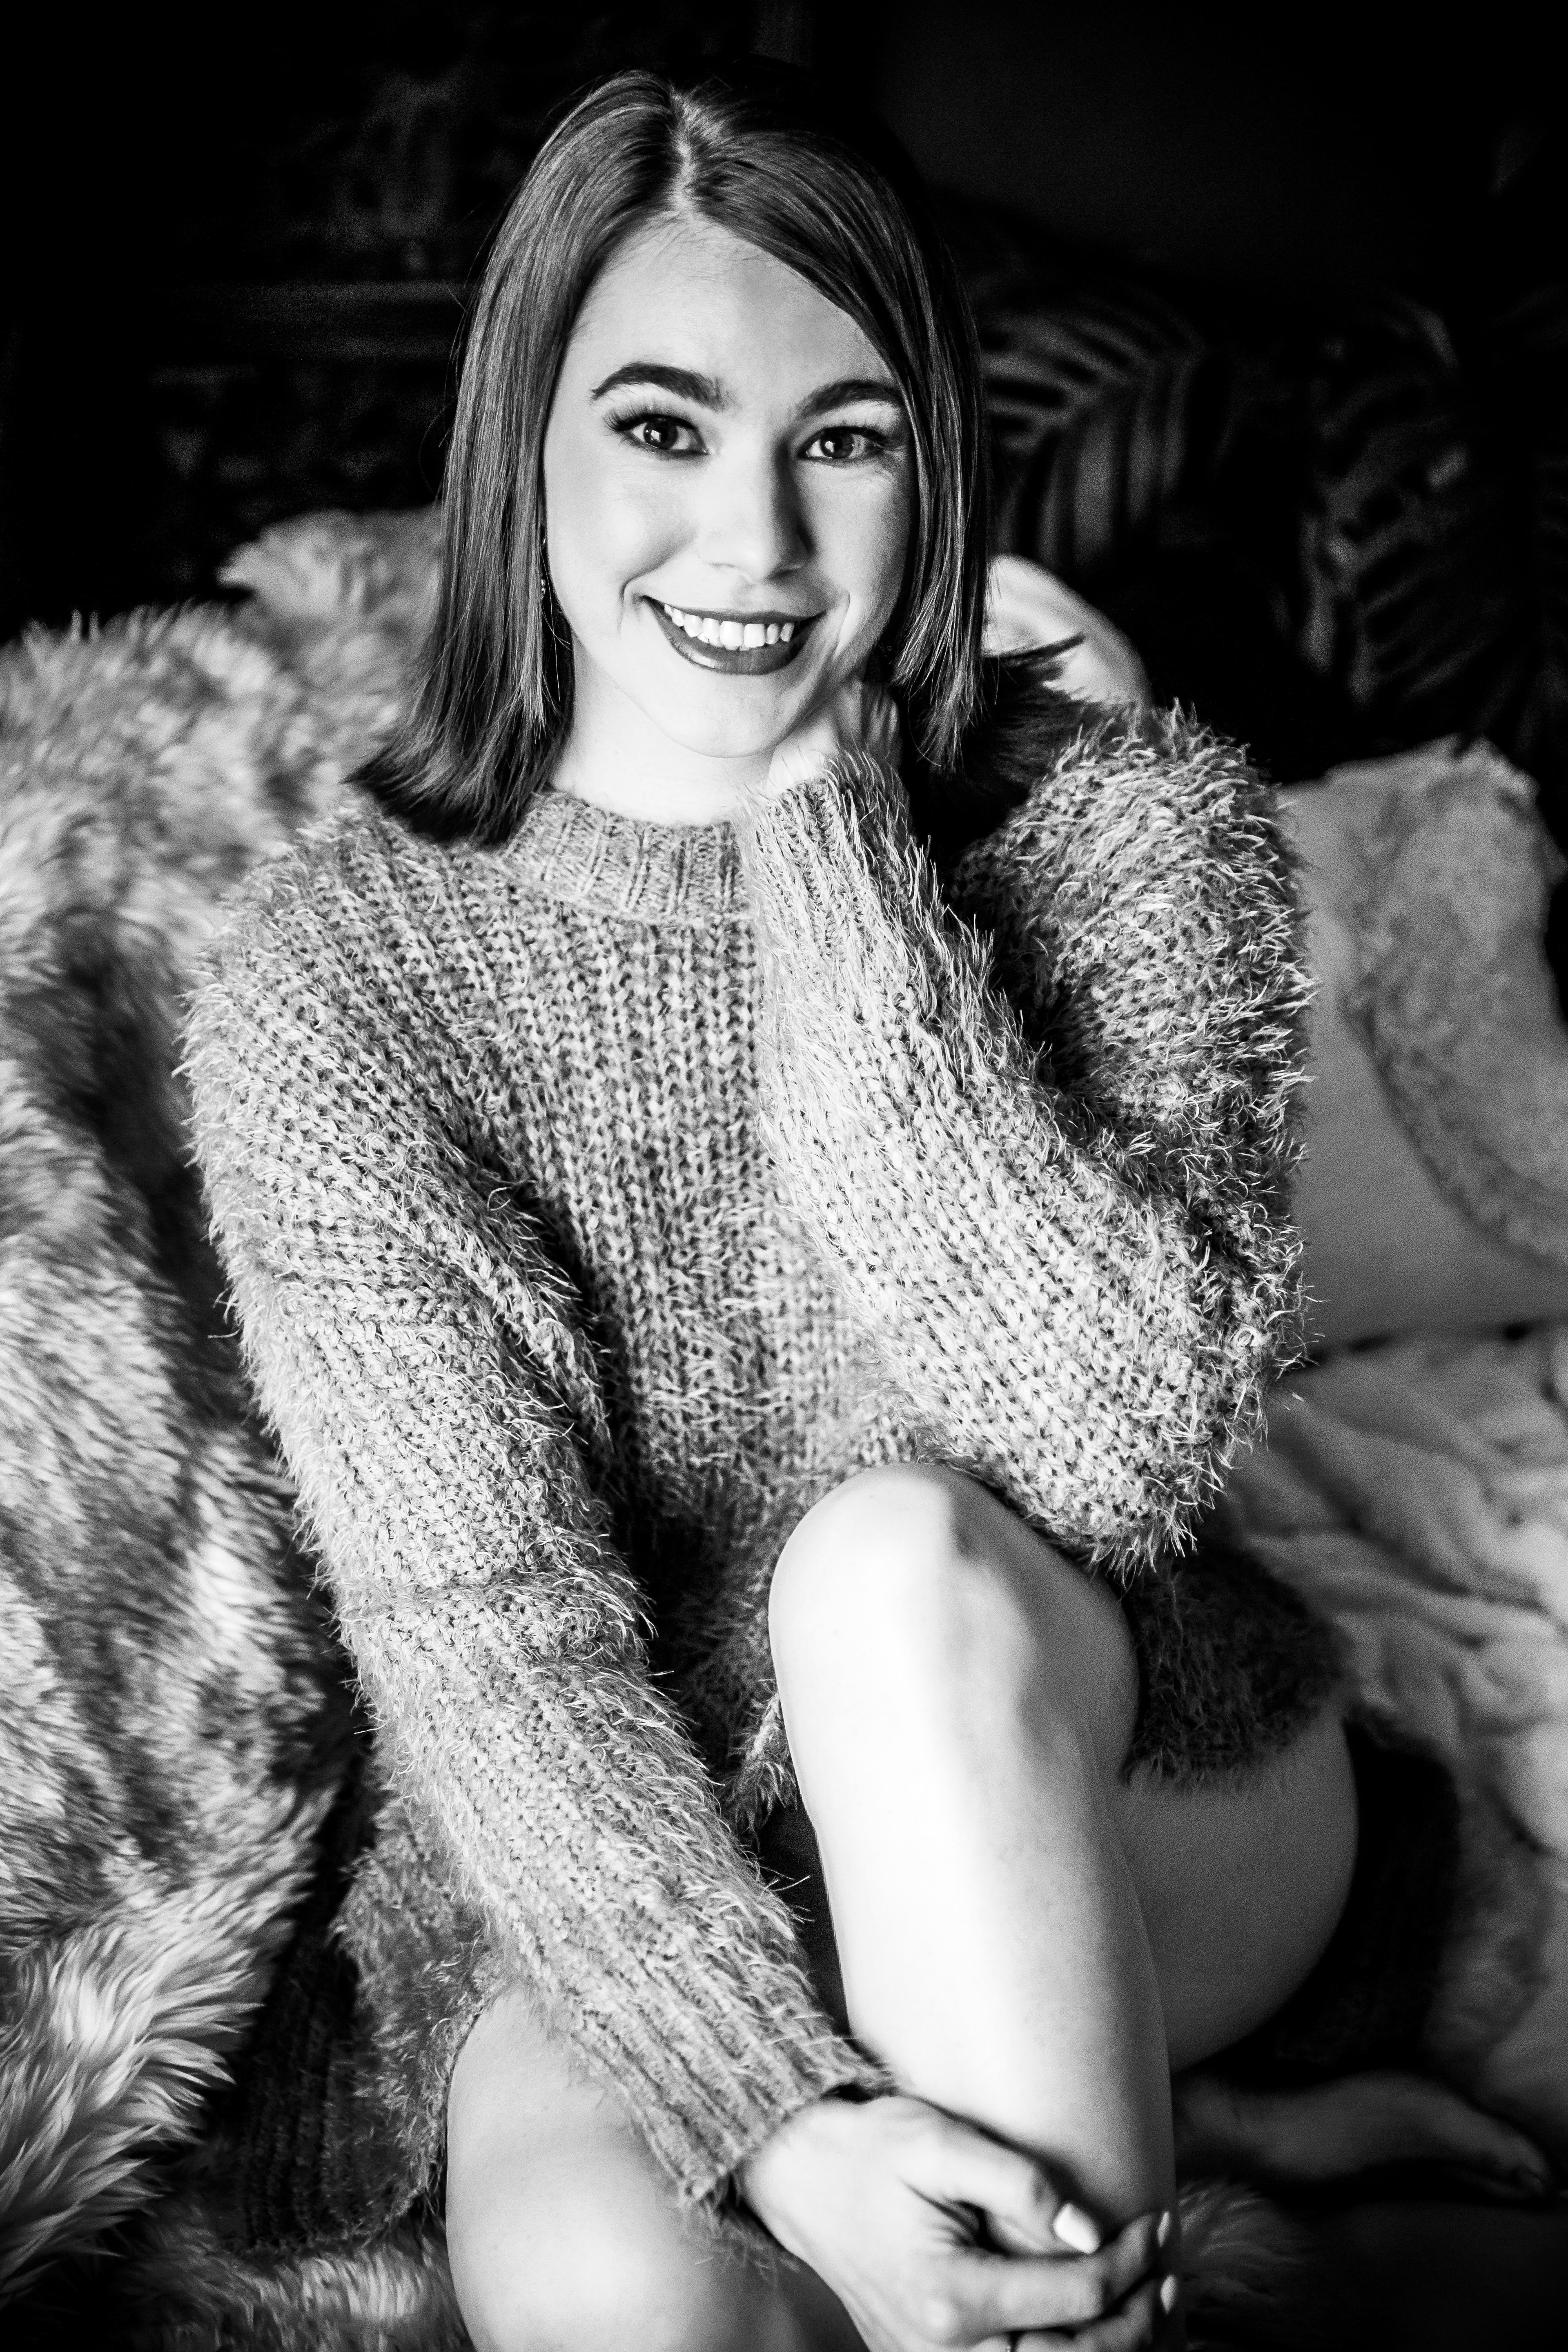 black and white photo of woman smiling while wearing sweater